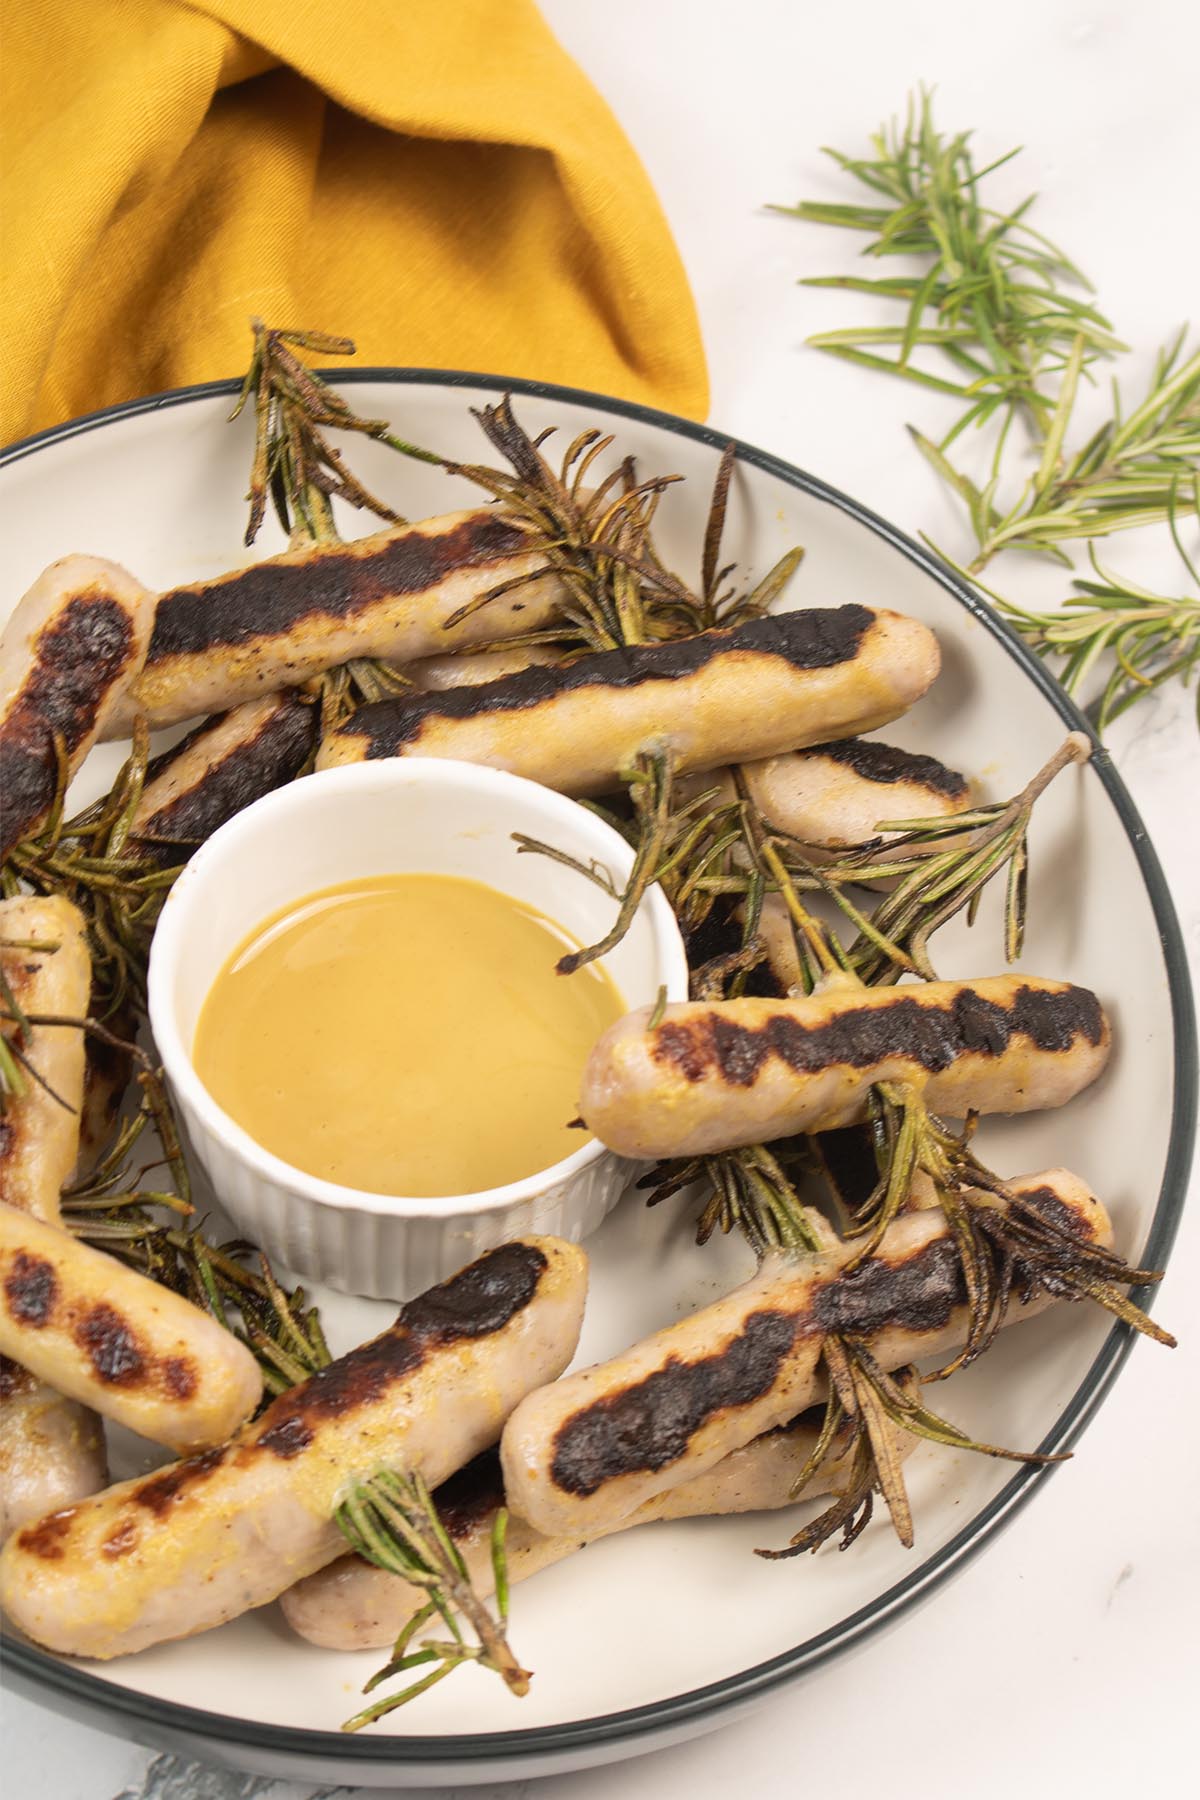 Chipolata rosemary skewers in a bowl with honey mustard dressing